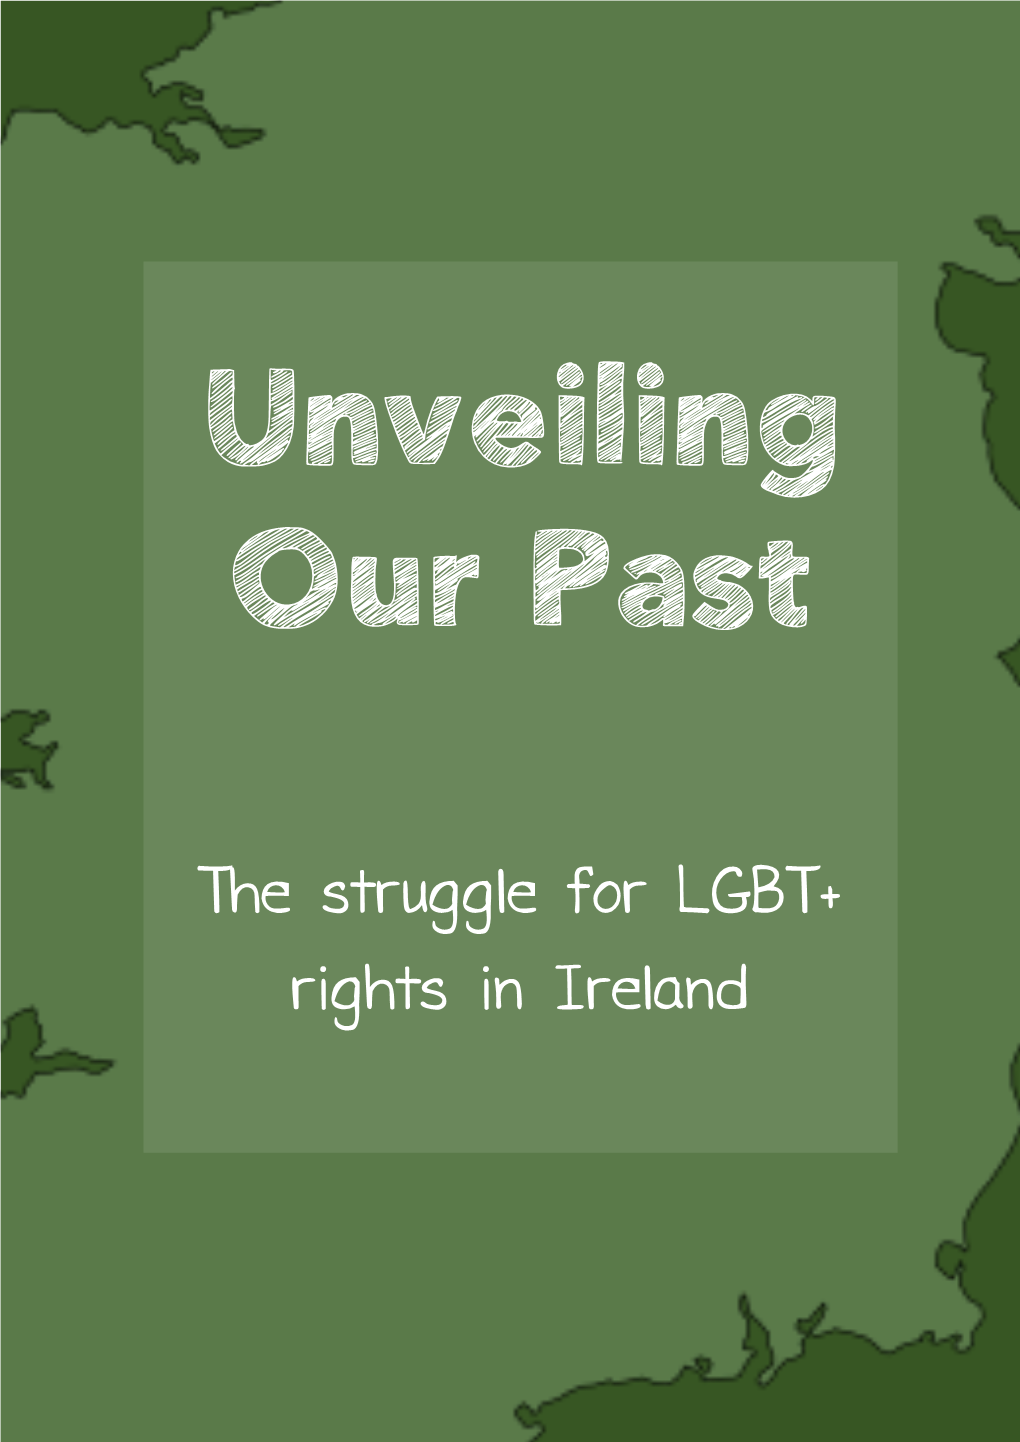 The Struggle for LGBT+ Rights in Ireland